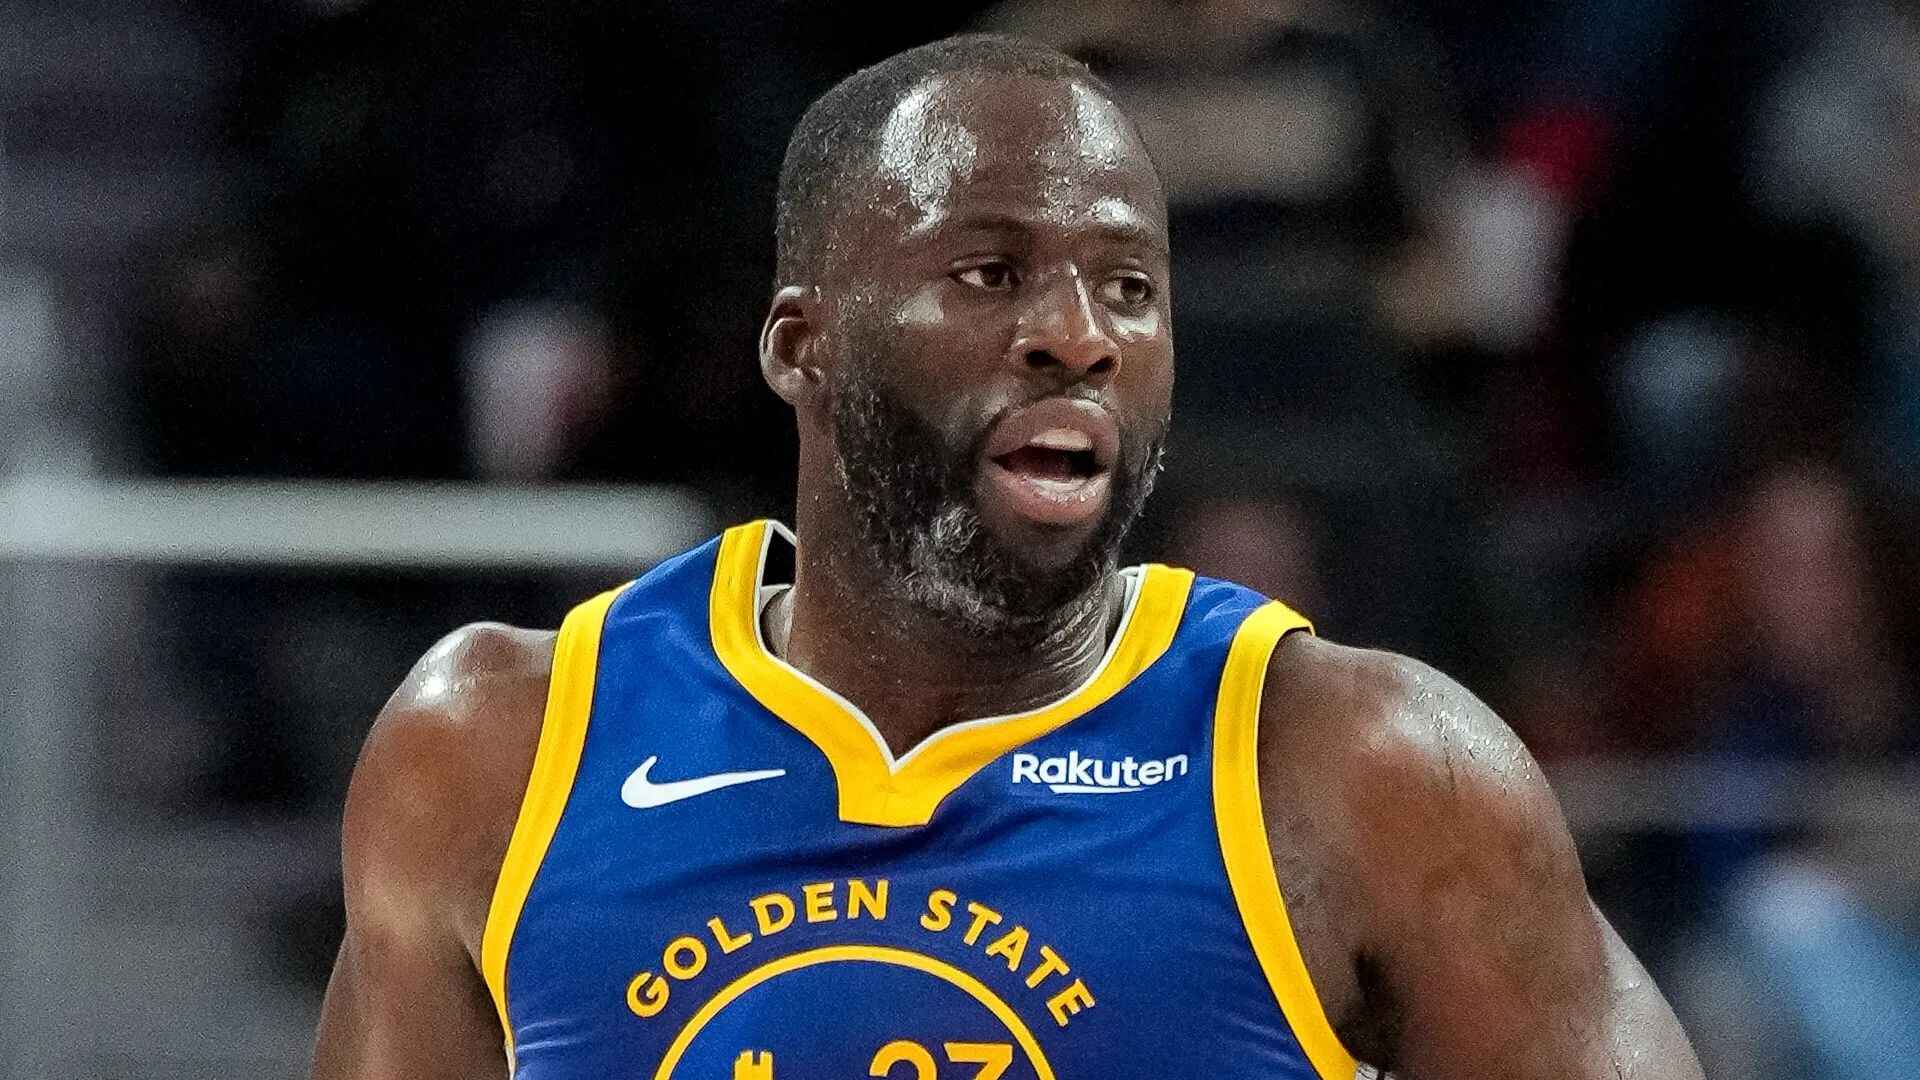 Draymond Green Receives Heavy Boos In First Game Back After Suspension